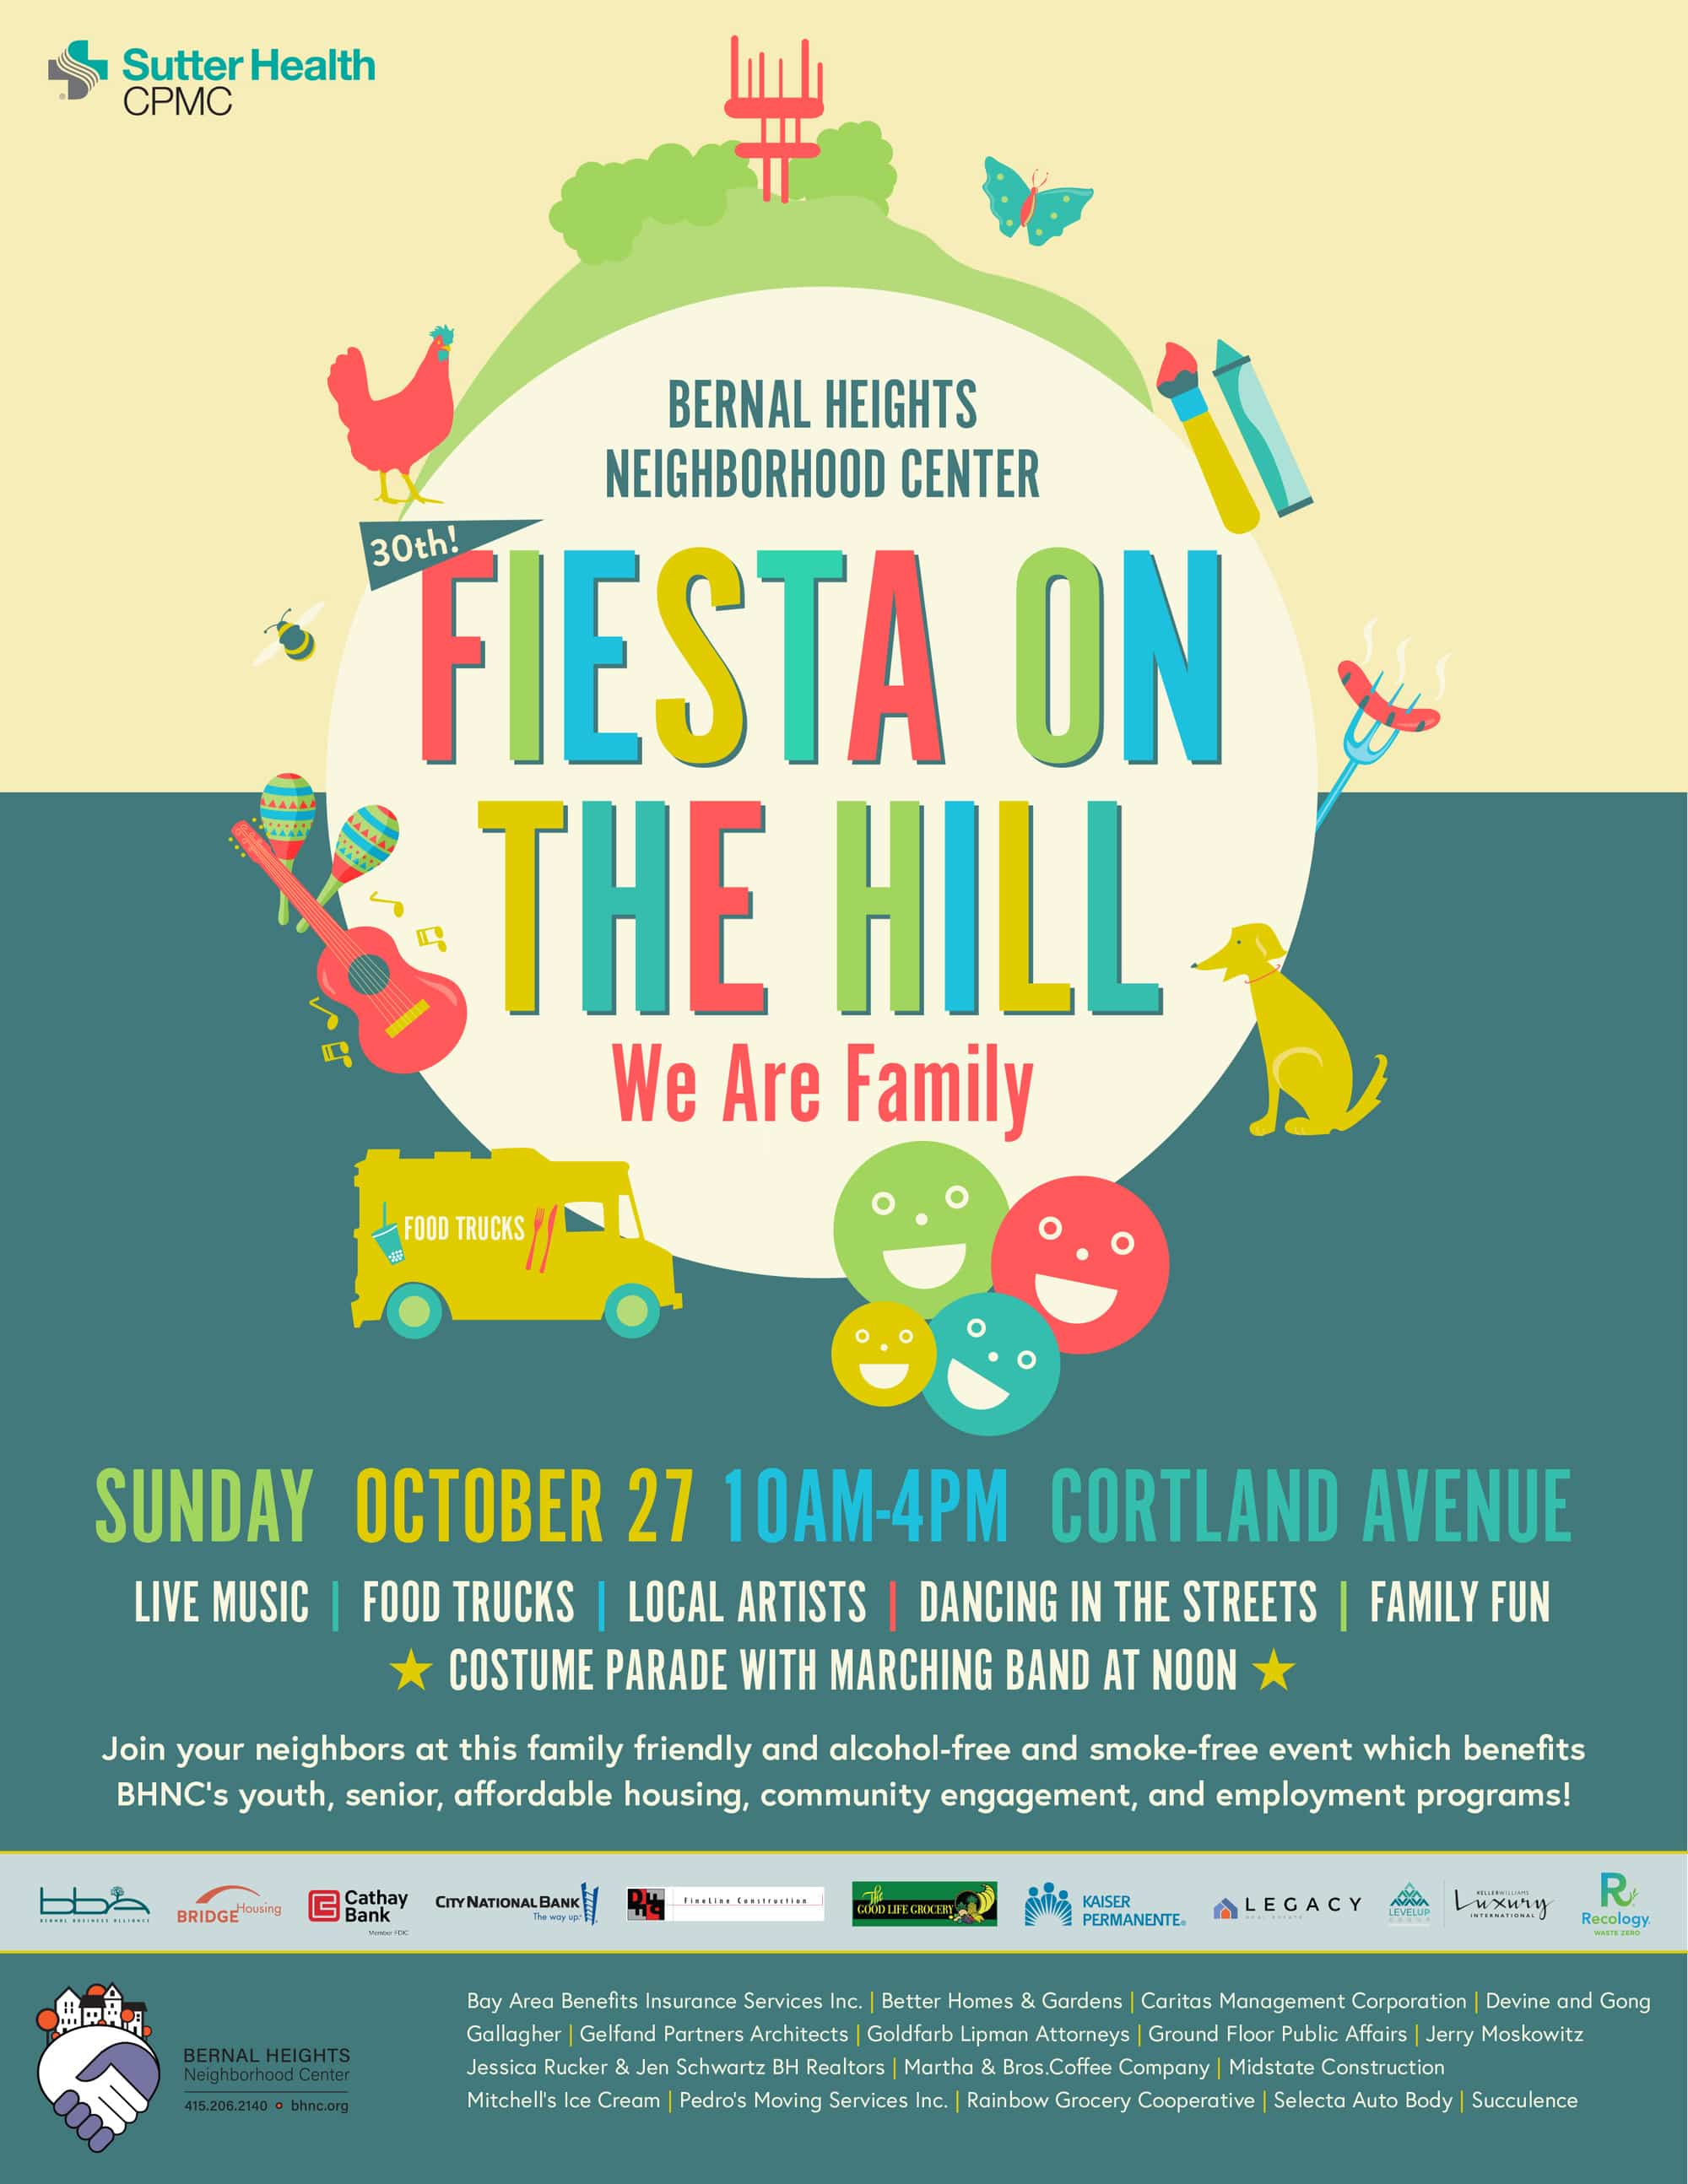 It’s the 2019 Fiesta on the Hill on Sunday, October 27th